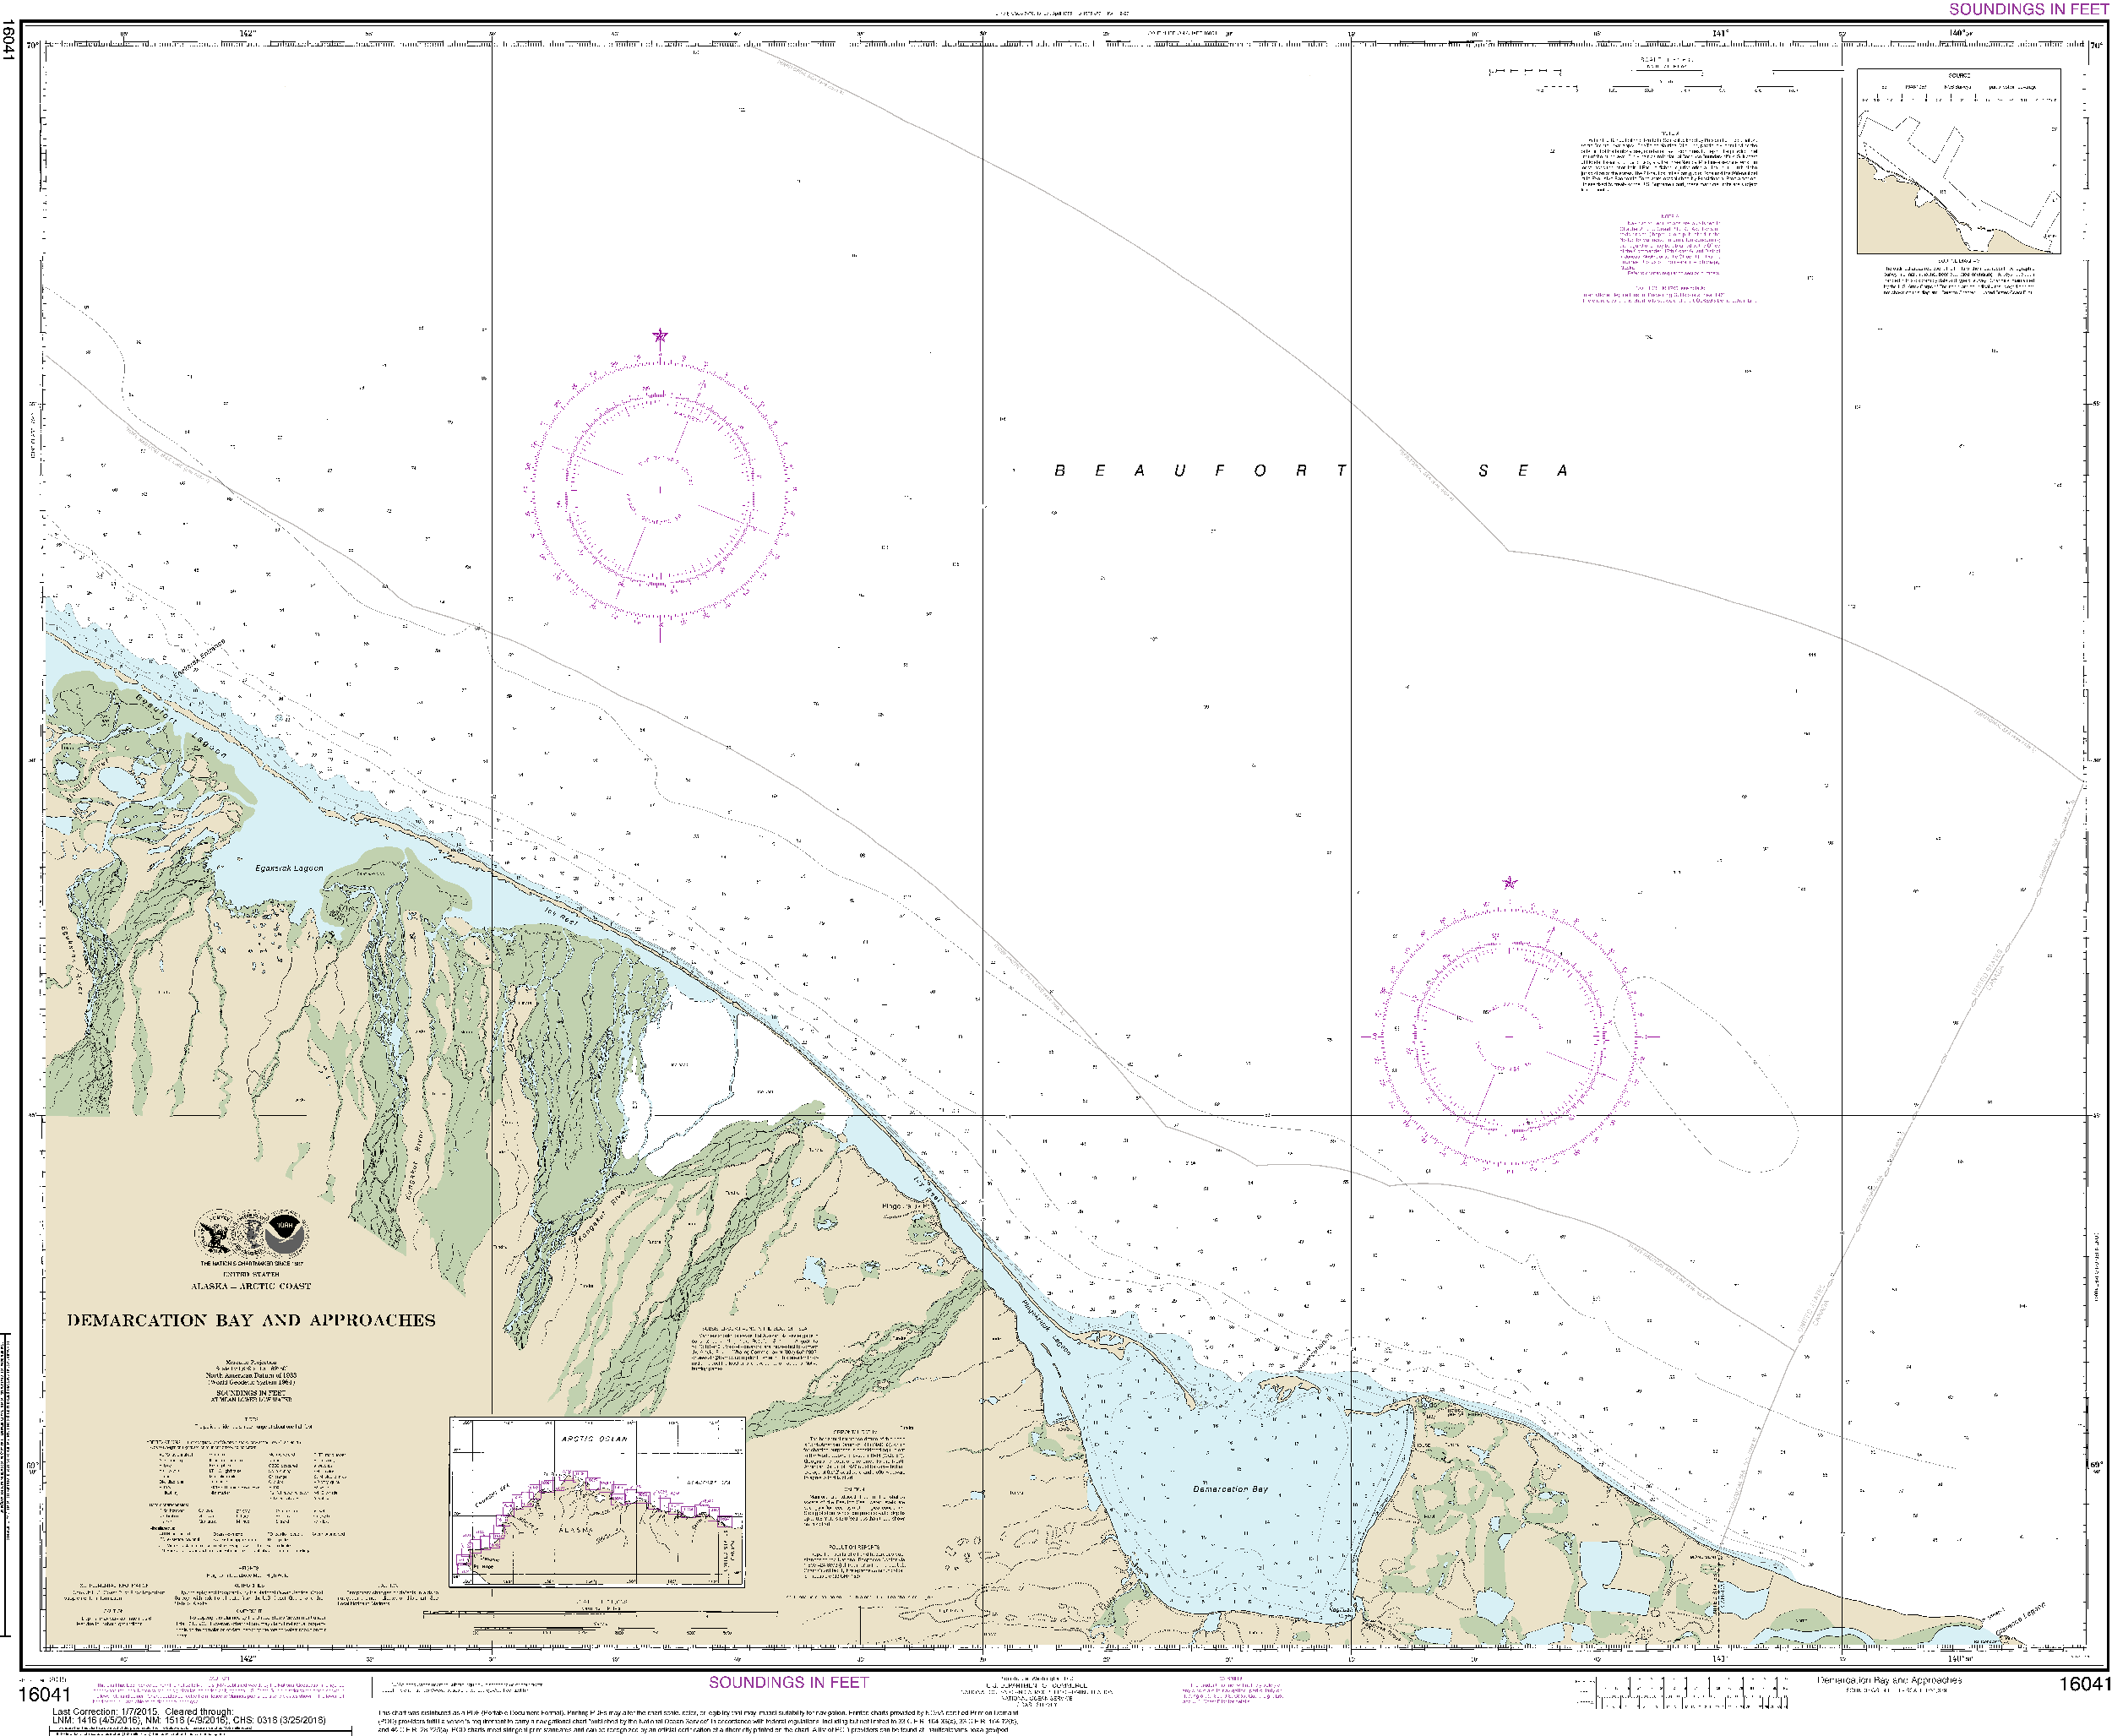 NOAA Nautical Chart 16041: Demarcation Bay and approaches